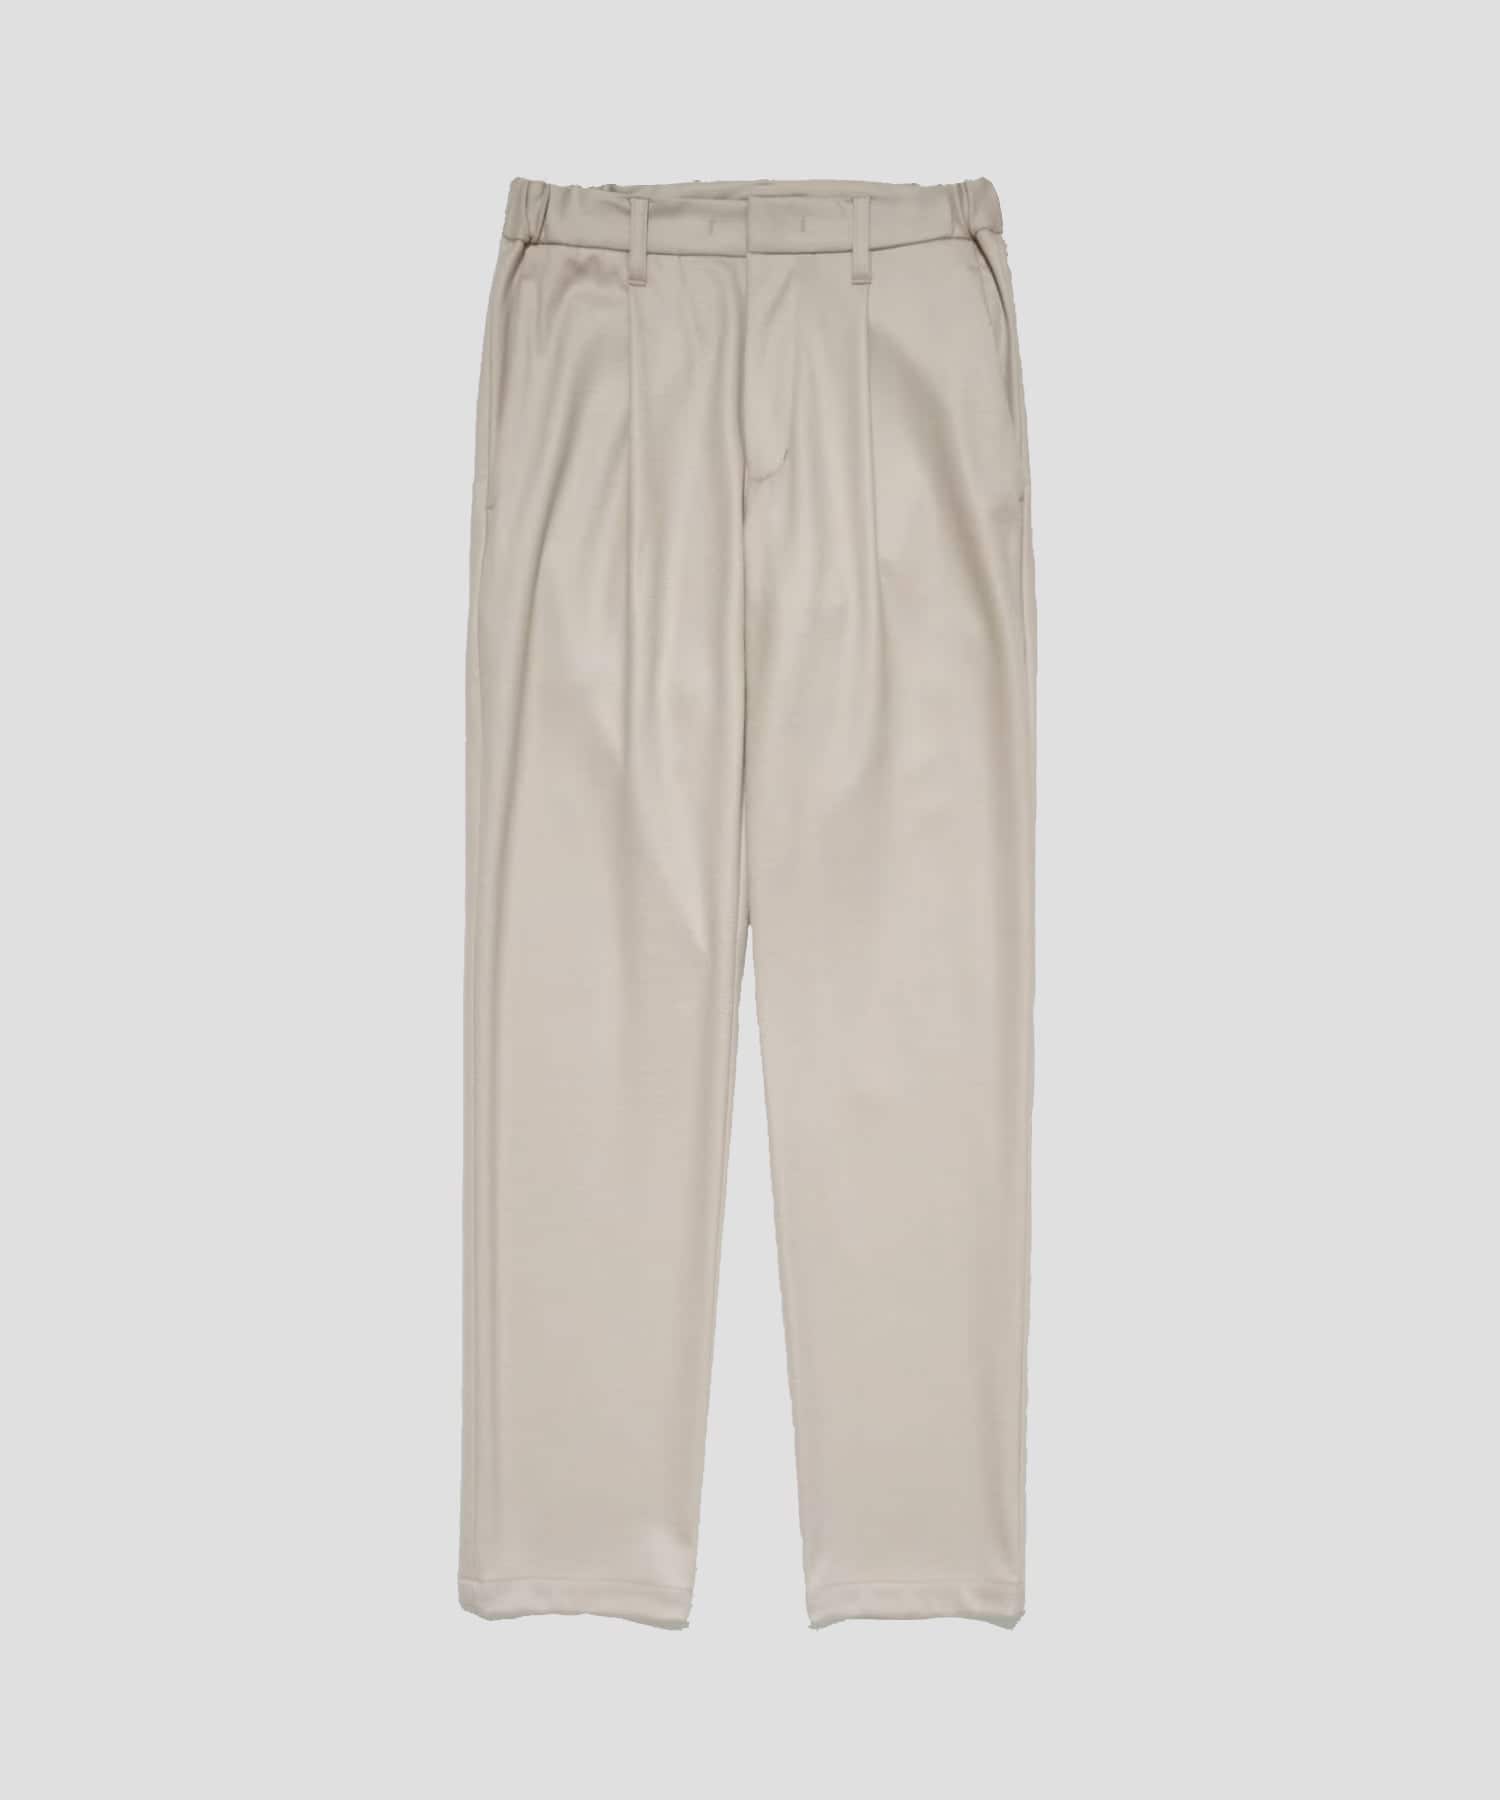 Flanne Lana Cashmere Touch Tapered Pants